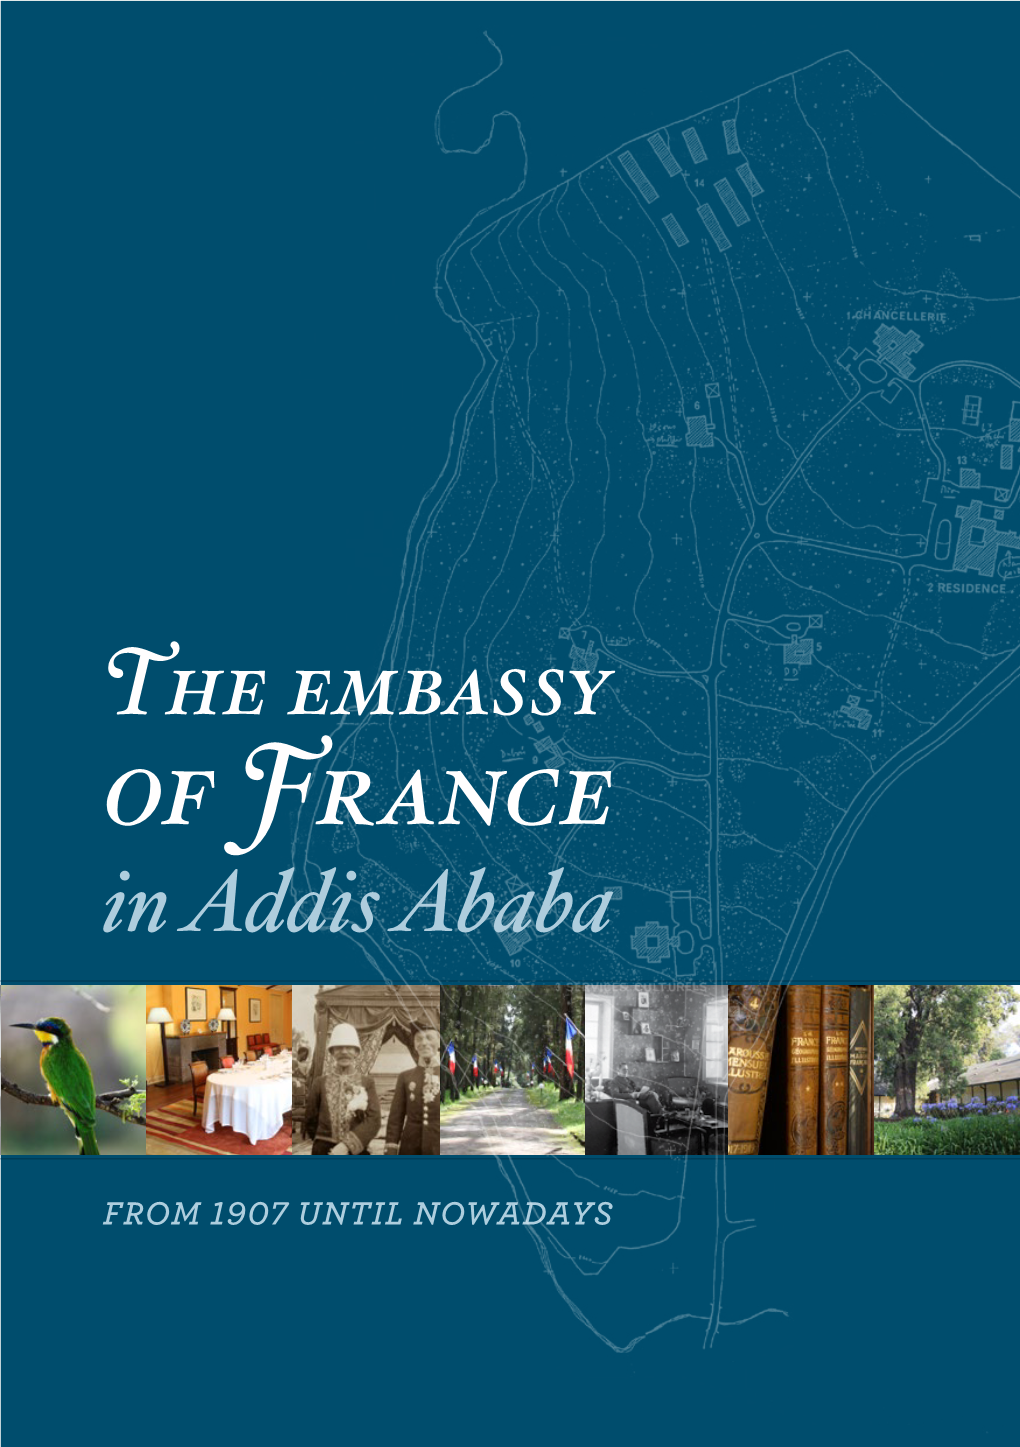 Of France in Addis Ababa